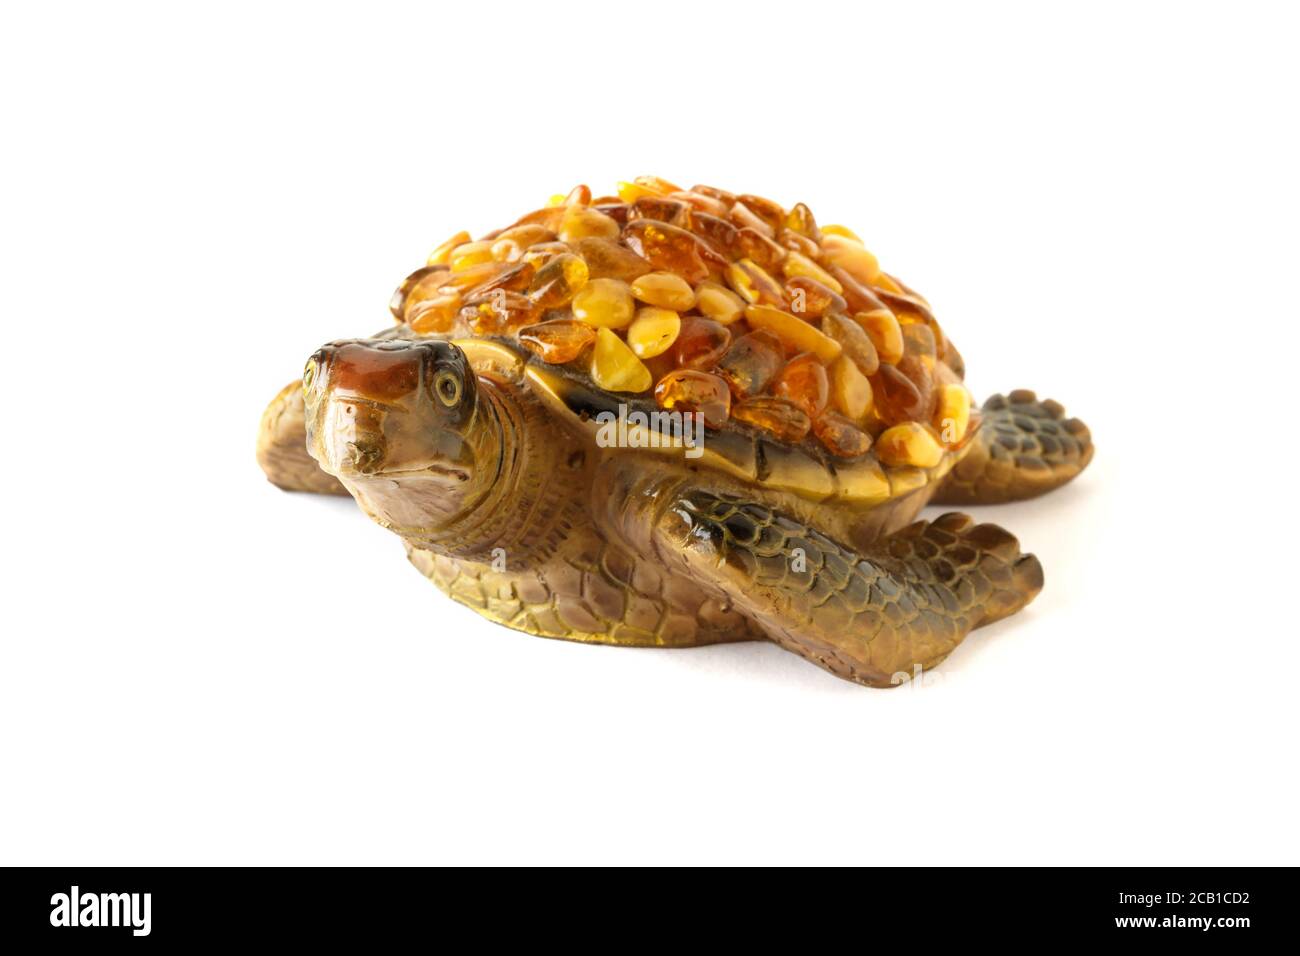 Figurine of a turtle on a white background with amber stones on the shell. Stock Photo